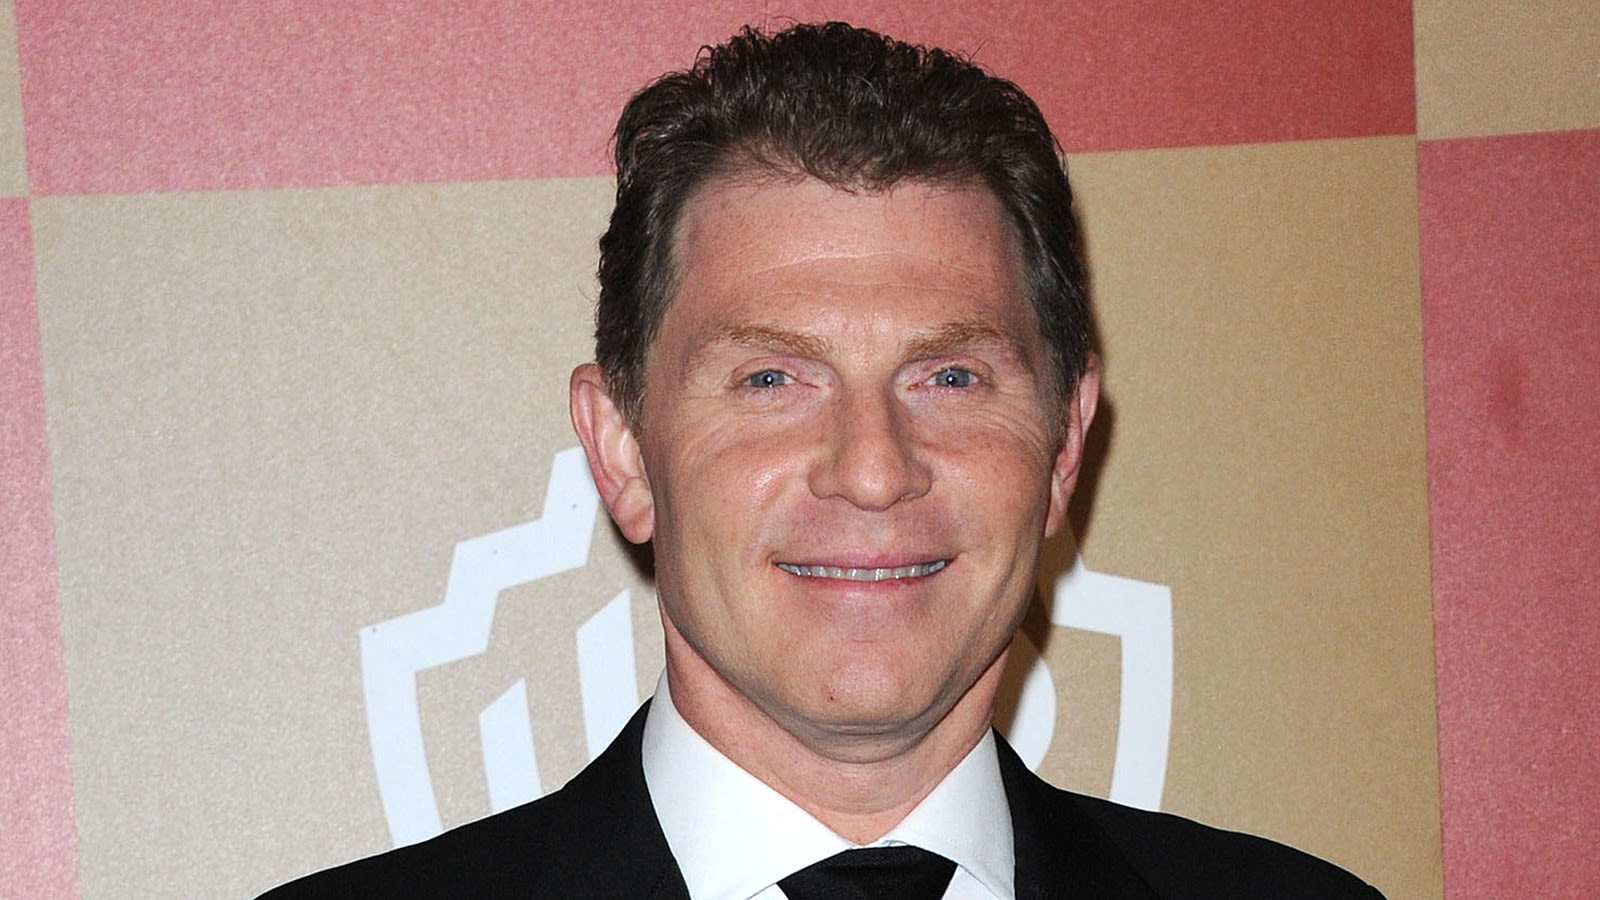 Bobby Flay's Tip For Serving Chicken Parmesan That Doesn't Get Soggy